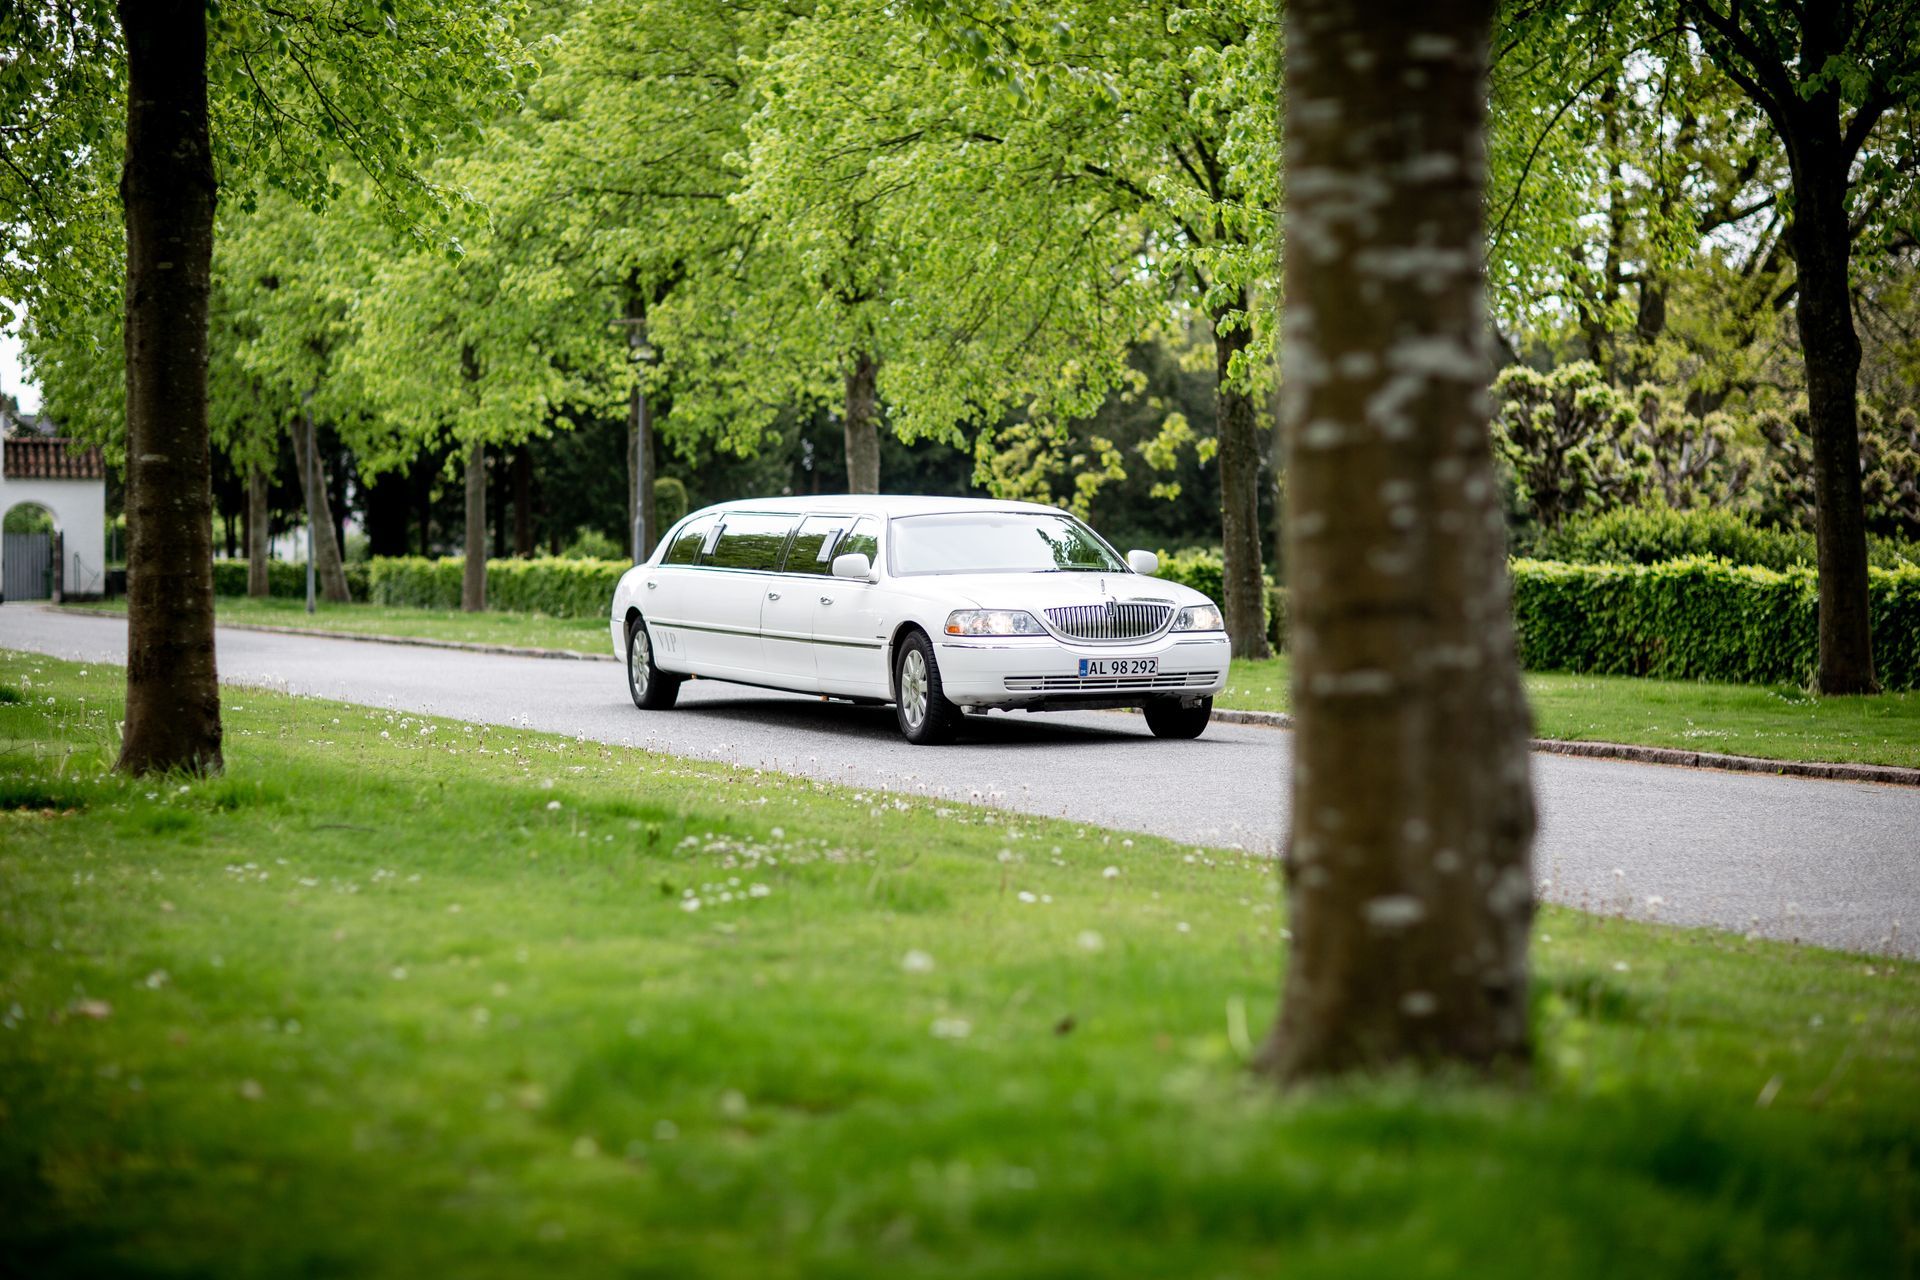 Limo Or Limousines For Funeral Services Near New Orleans In LA